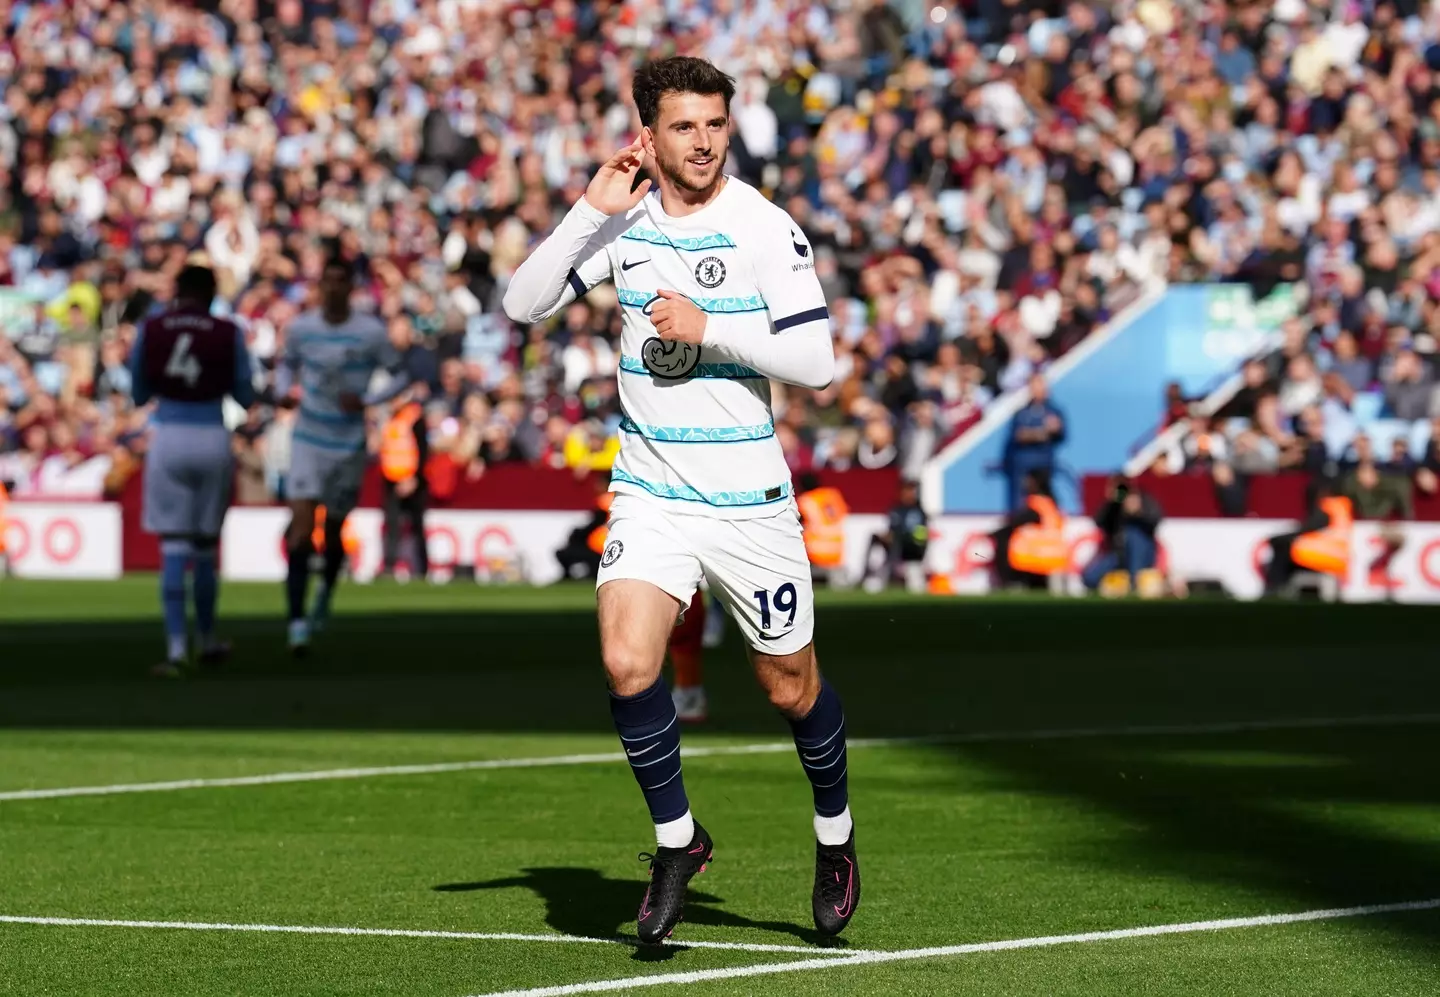 Chelsea's Mason Mount celebrates scoring their side's first goal of the game during the Premier League match at Villa Park. (Alamy)